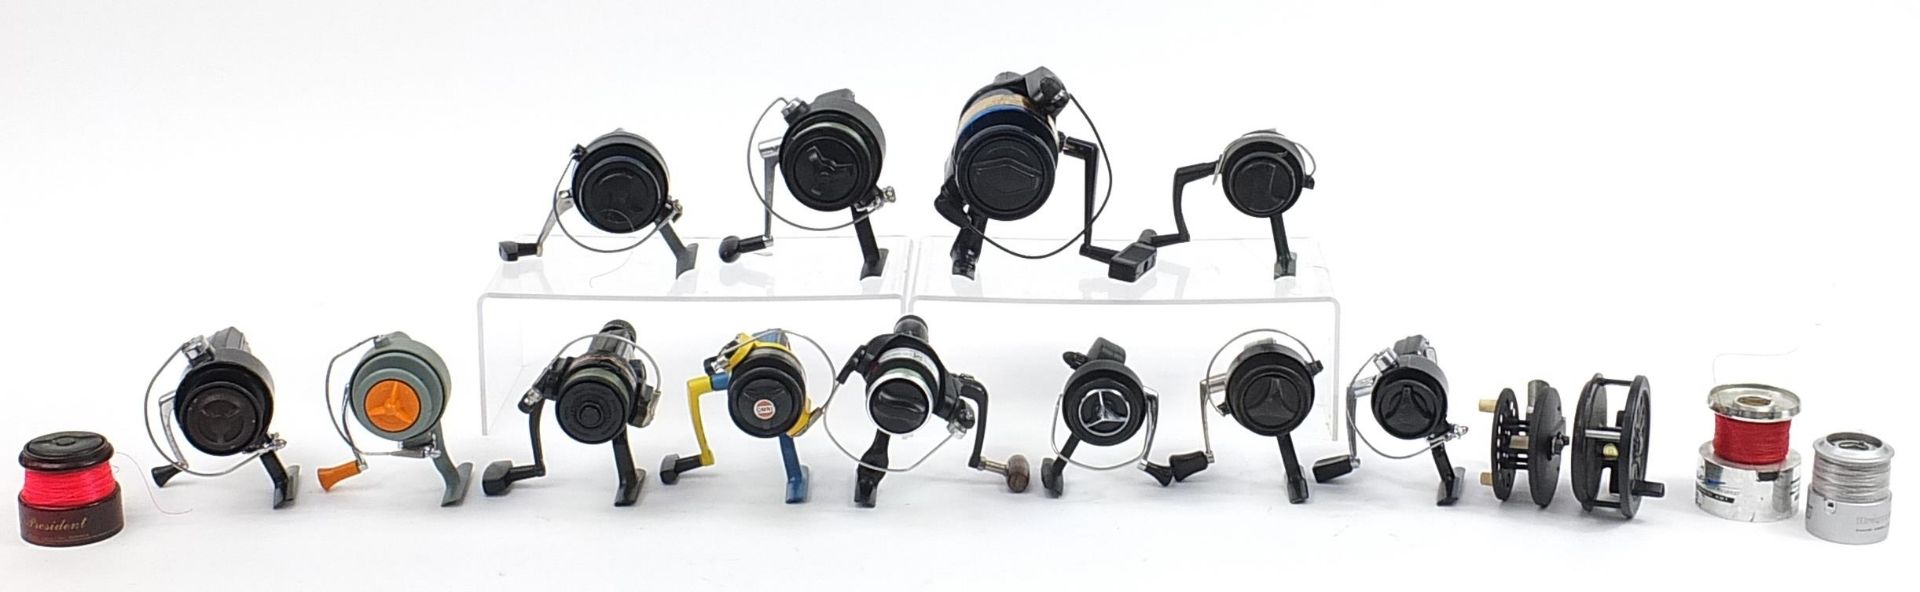 Fishing reels including INNI and Galion